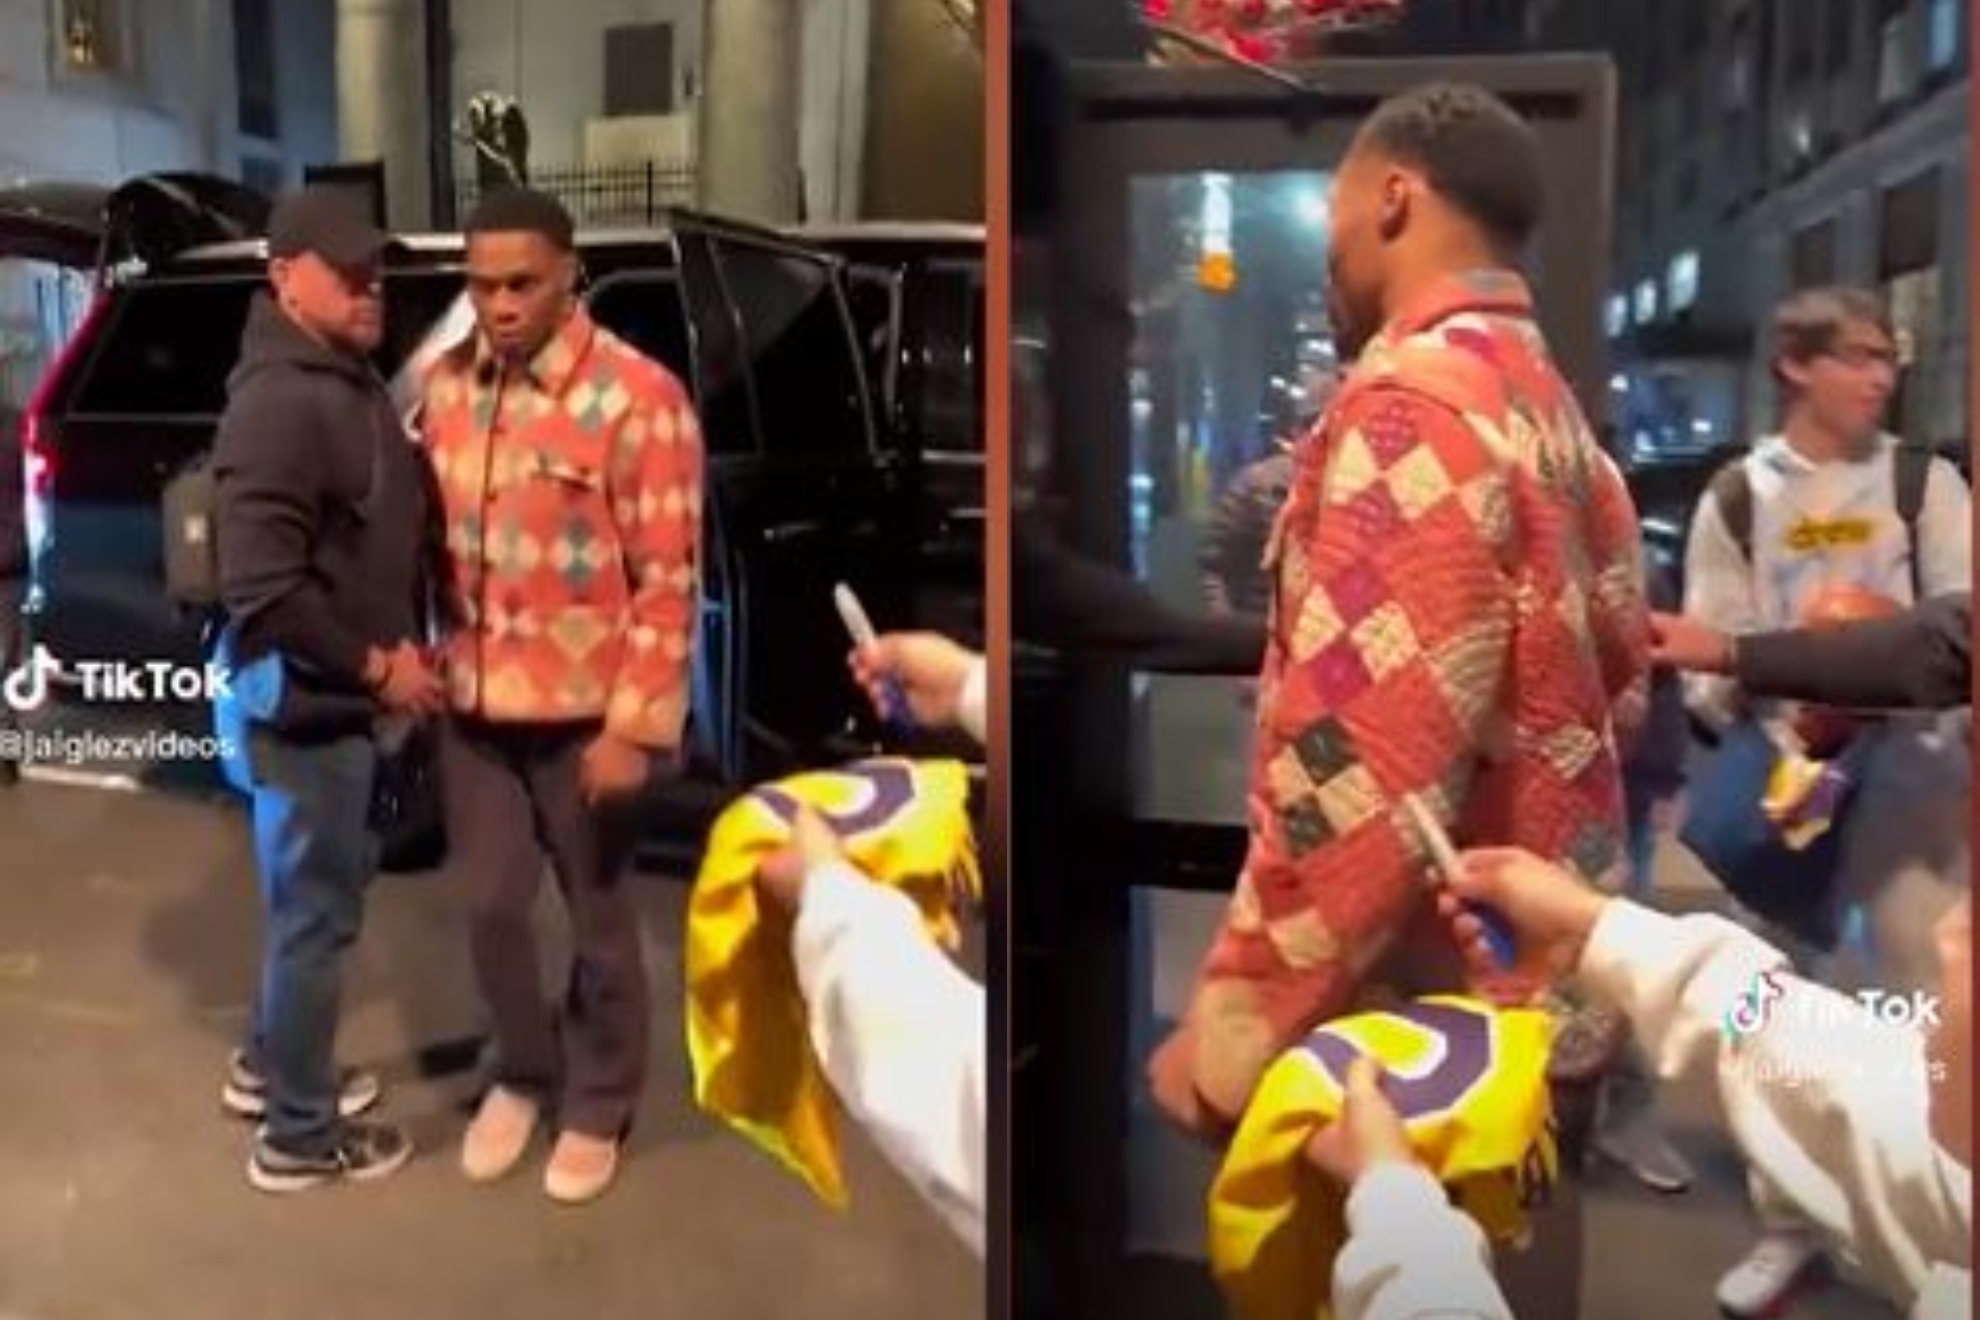 Westbrooks ugly gesture to a young fan that is being widely criticized on social media